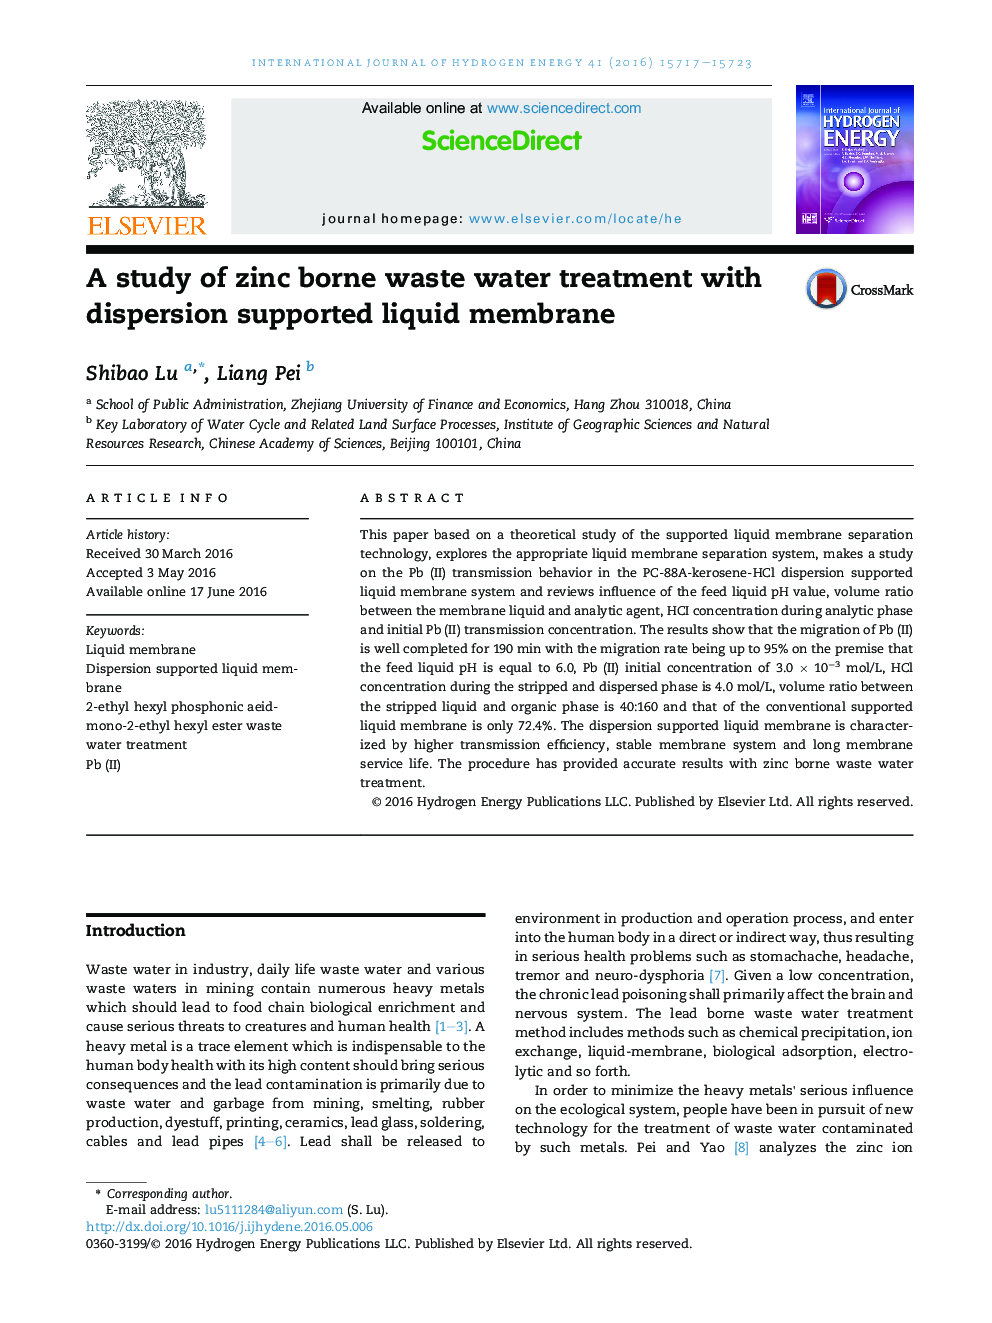 A study of zinc borne waste water treatment with dispersion supported liquid membrane